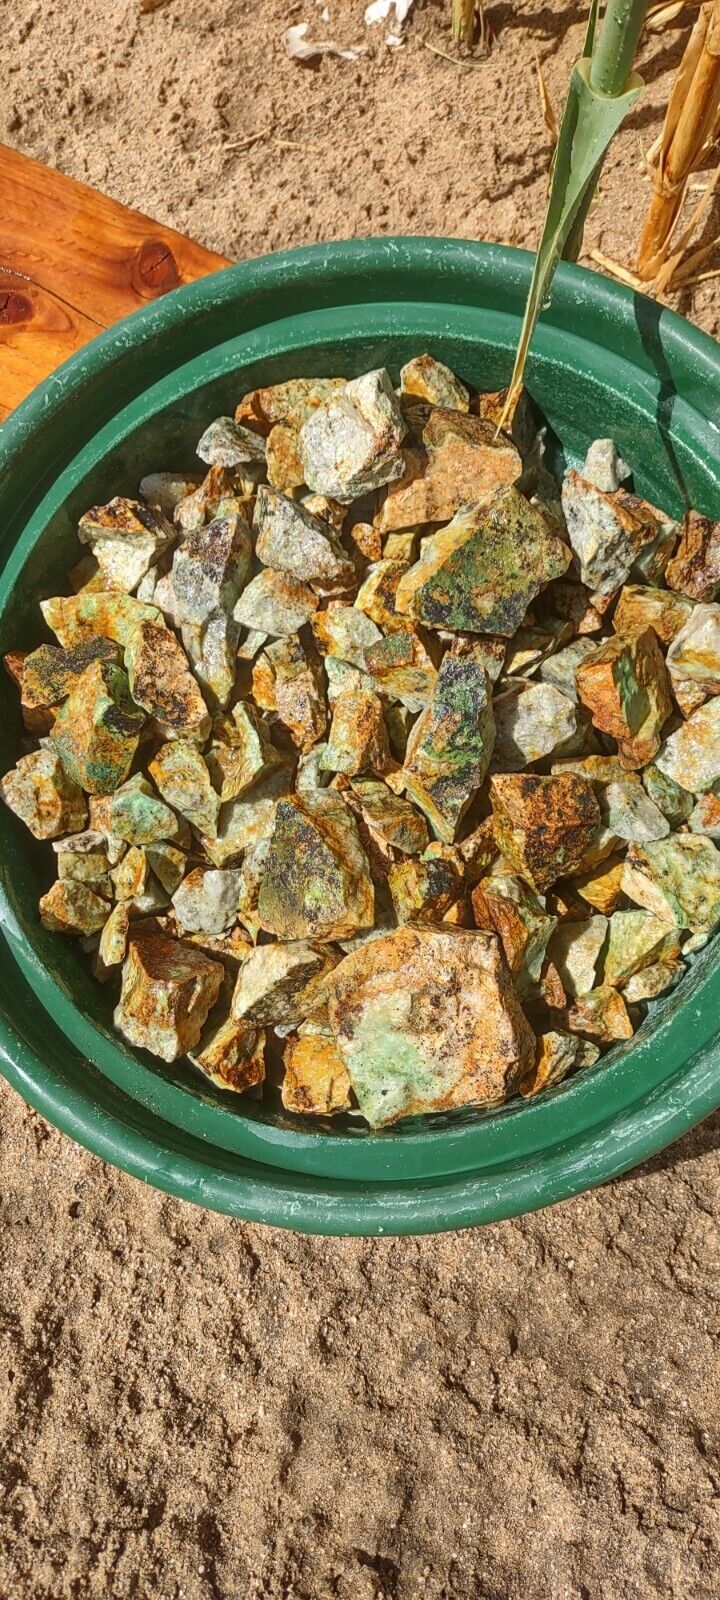 25 Pounds - Gold Ore Copper Oxides Chalcopyrite Chrysocolla Red Keep Mine 